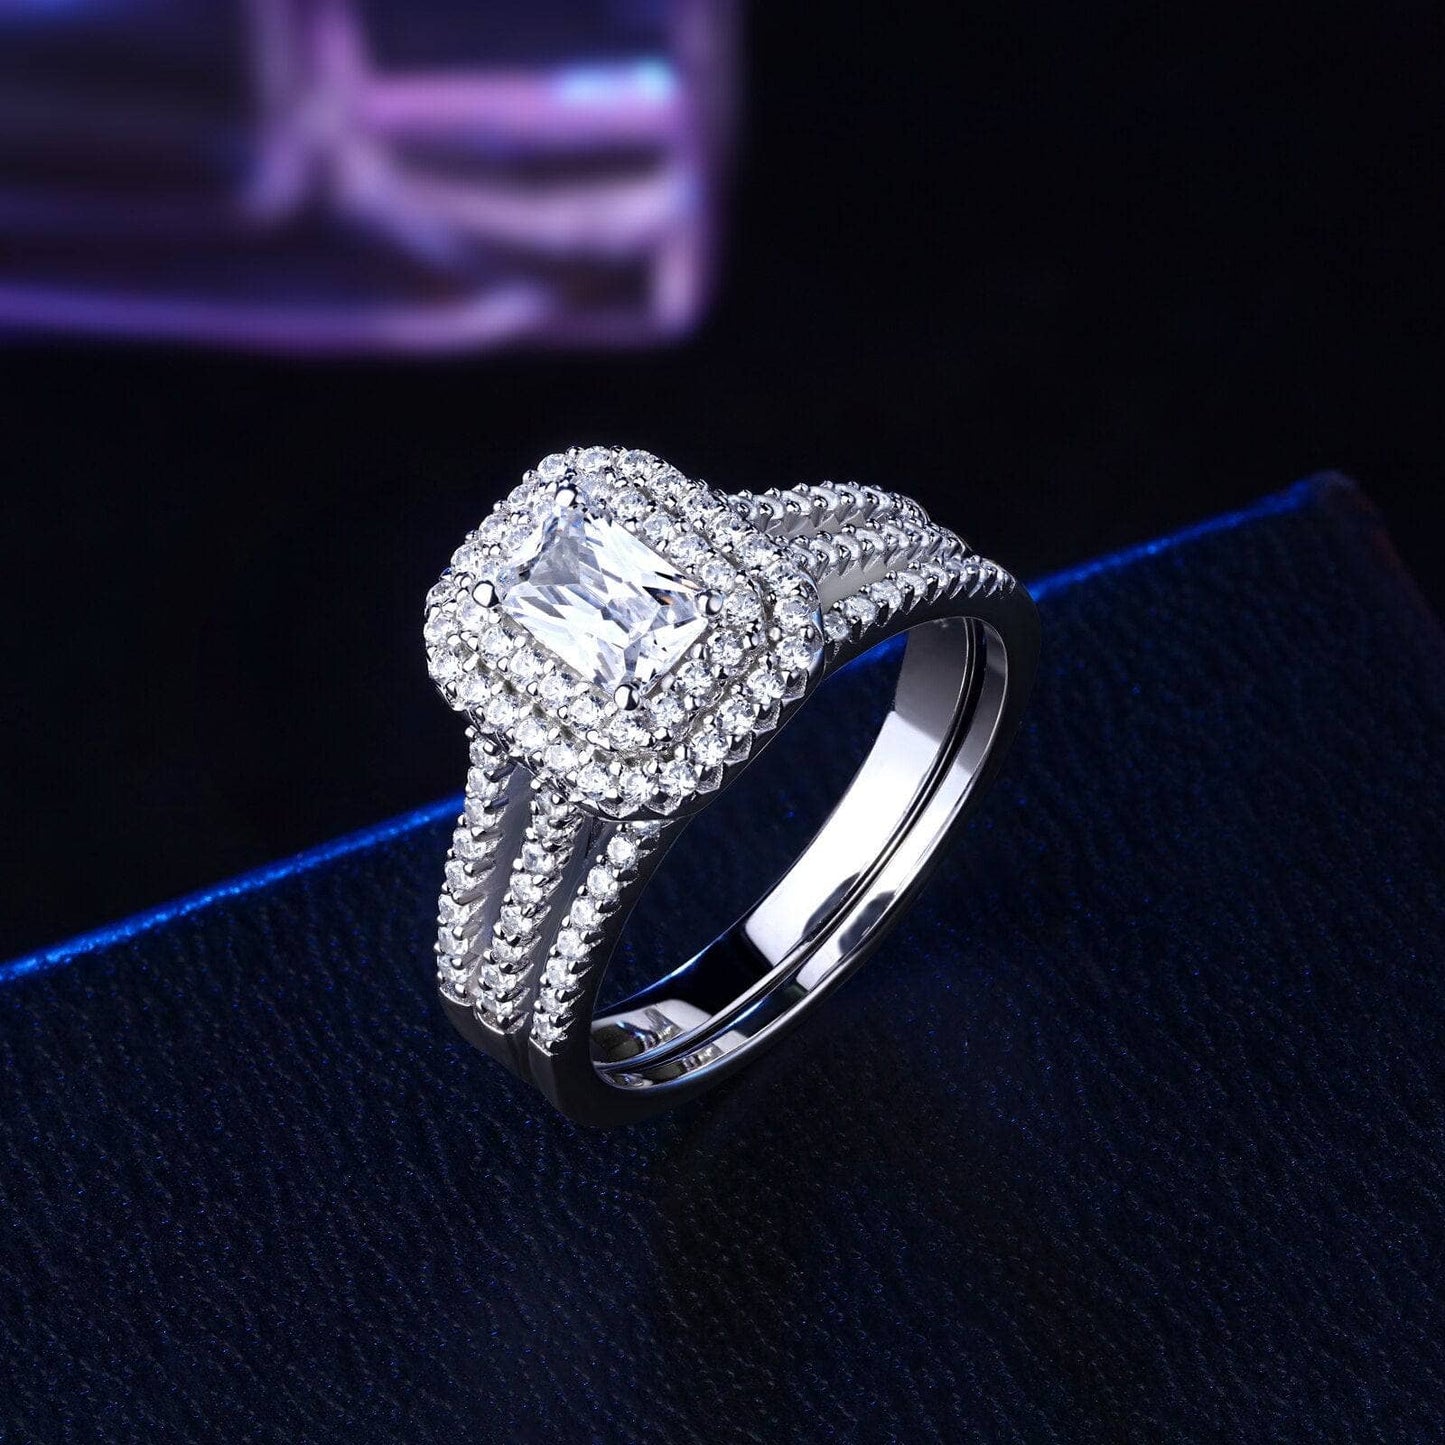 925 Sterling Silver White Radiant Cut Cubic Zirconia Ring Set